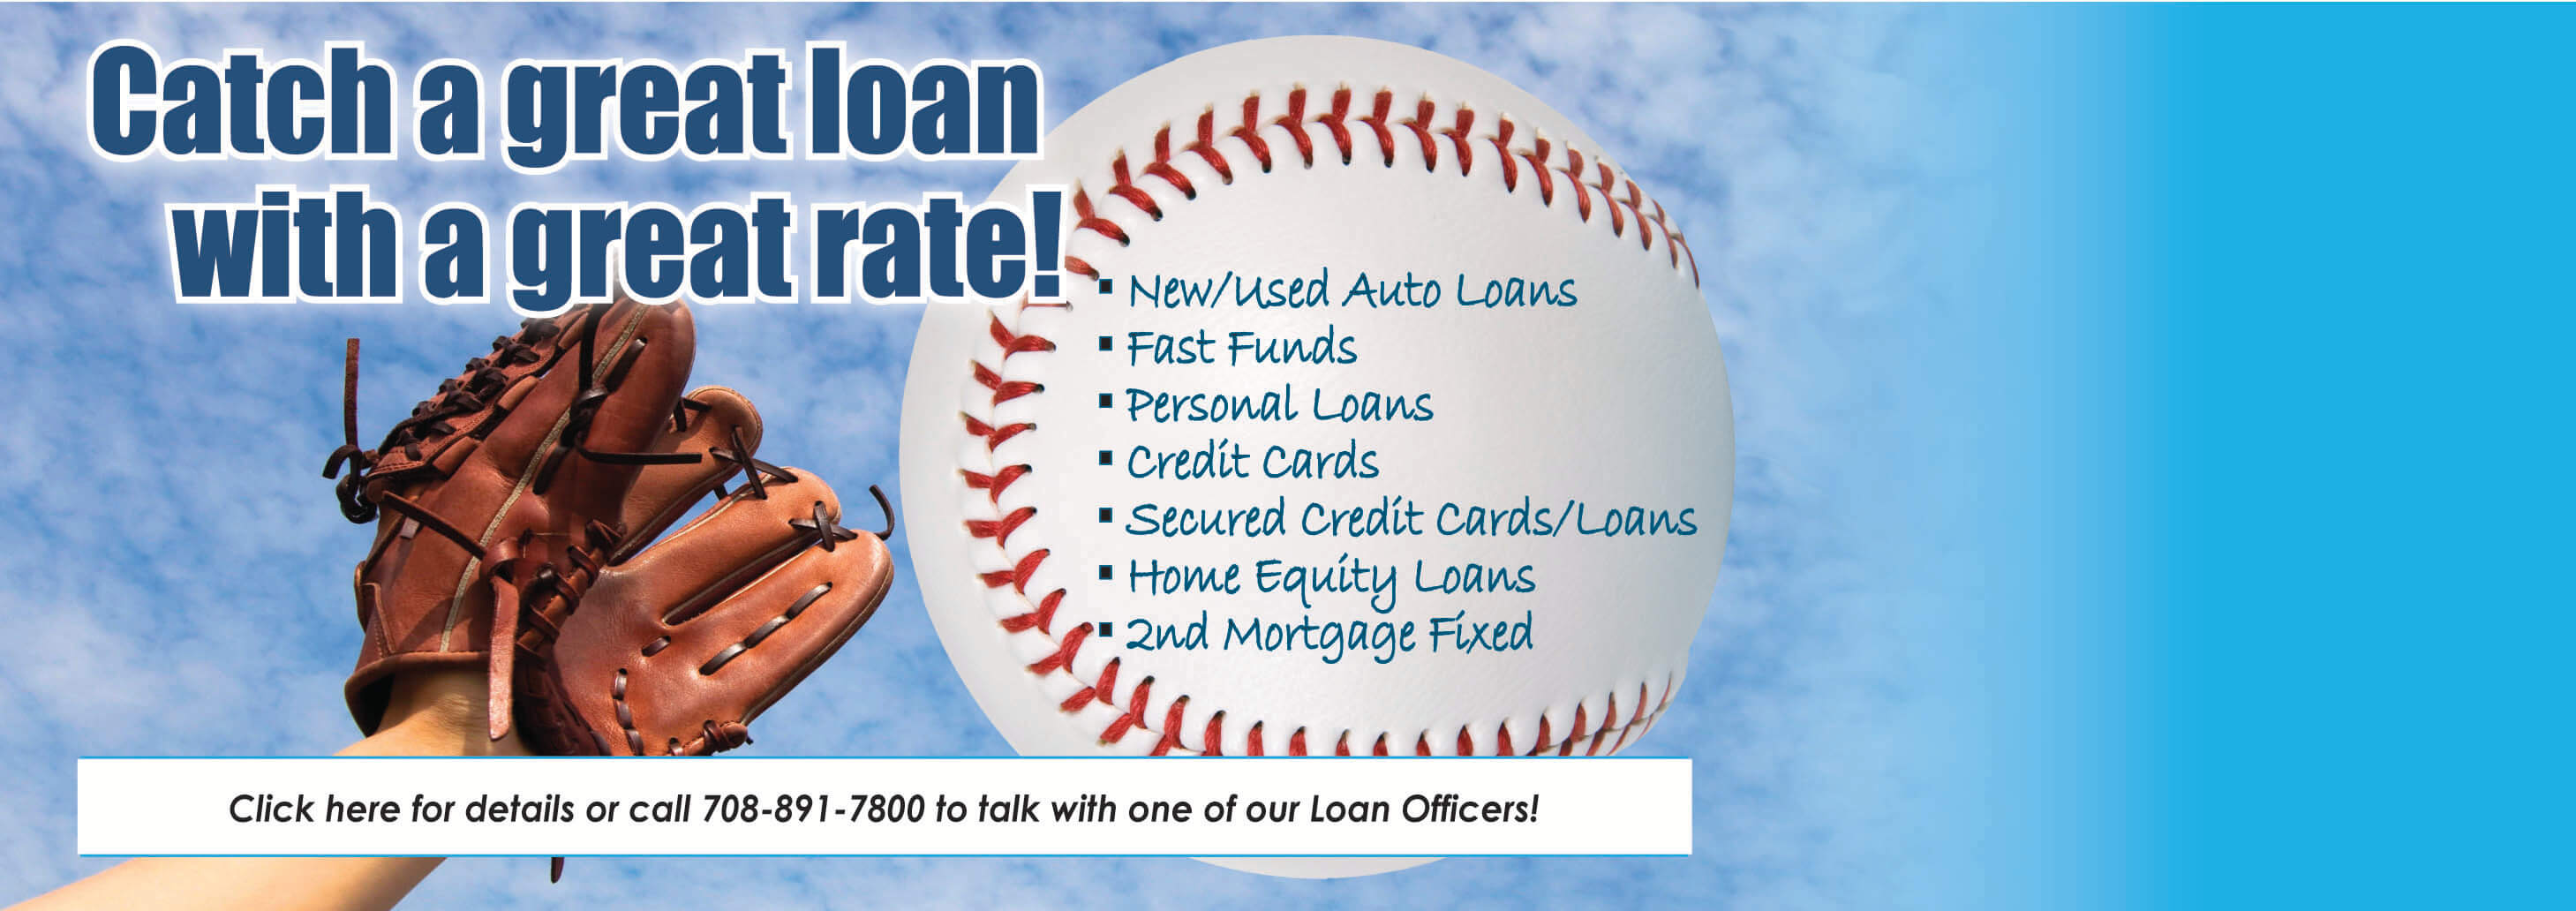 Catch a great loan with a great rate! Click here for details or call 708-891-7800 to talk with one of our Loan Officers!